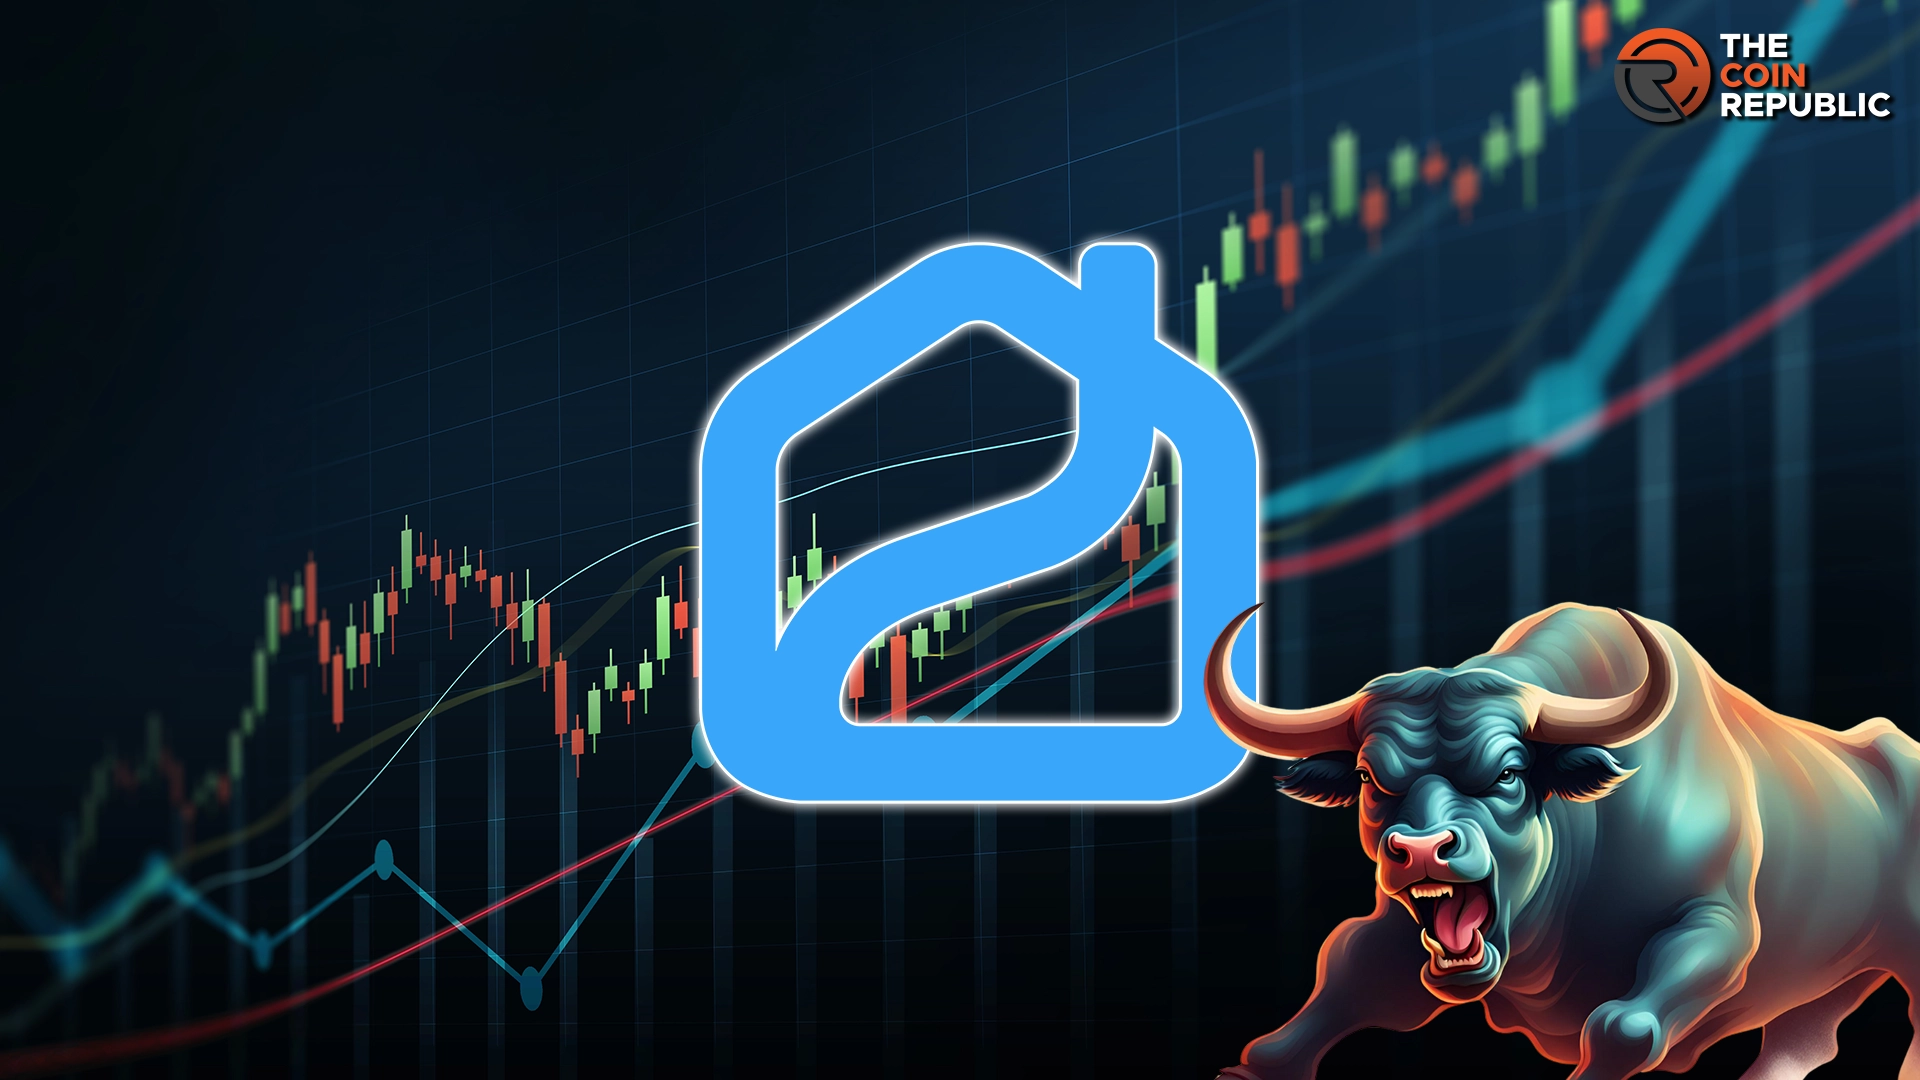 PRO Looks Bullish; Can Bulls Continue to Stretch Gains Above $3?